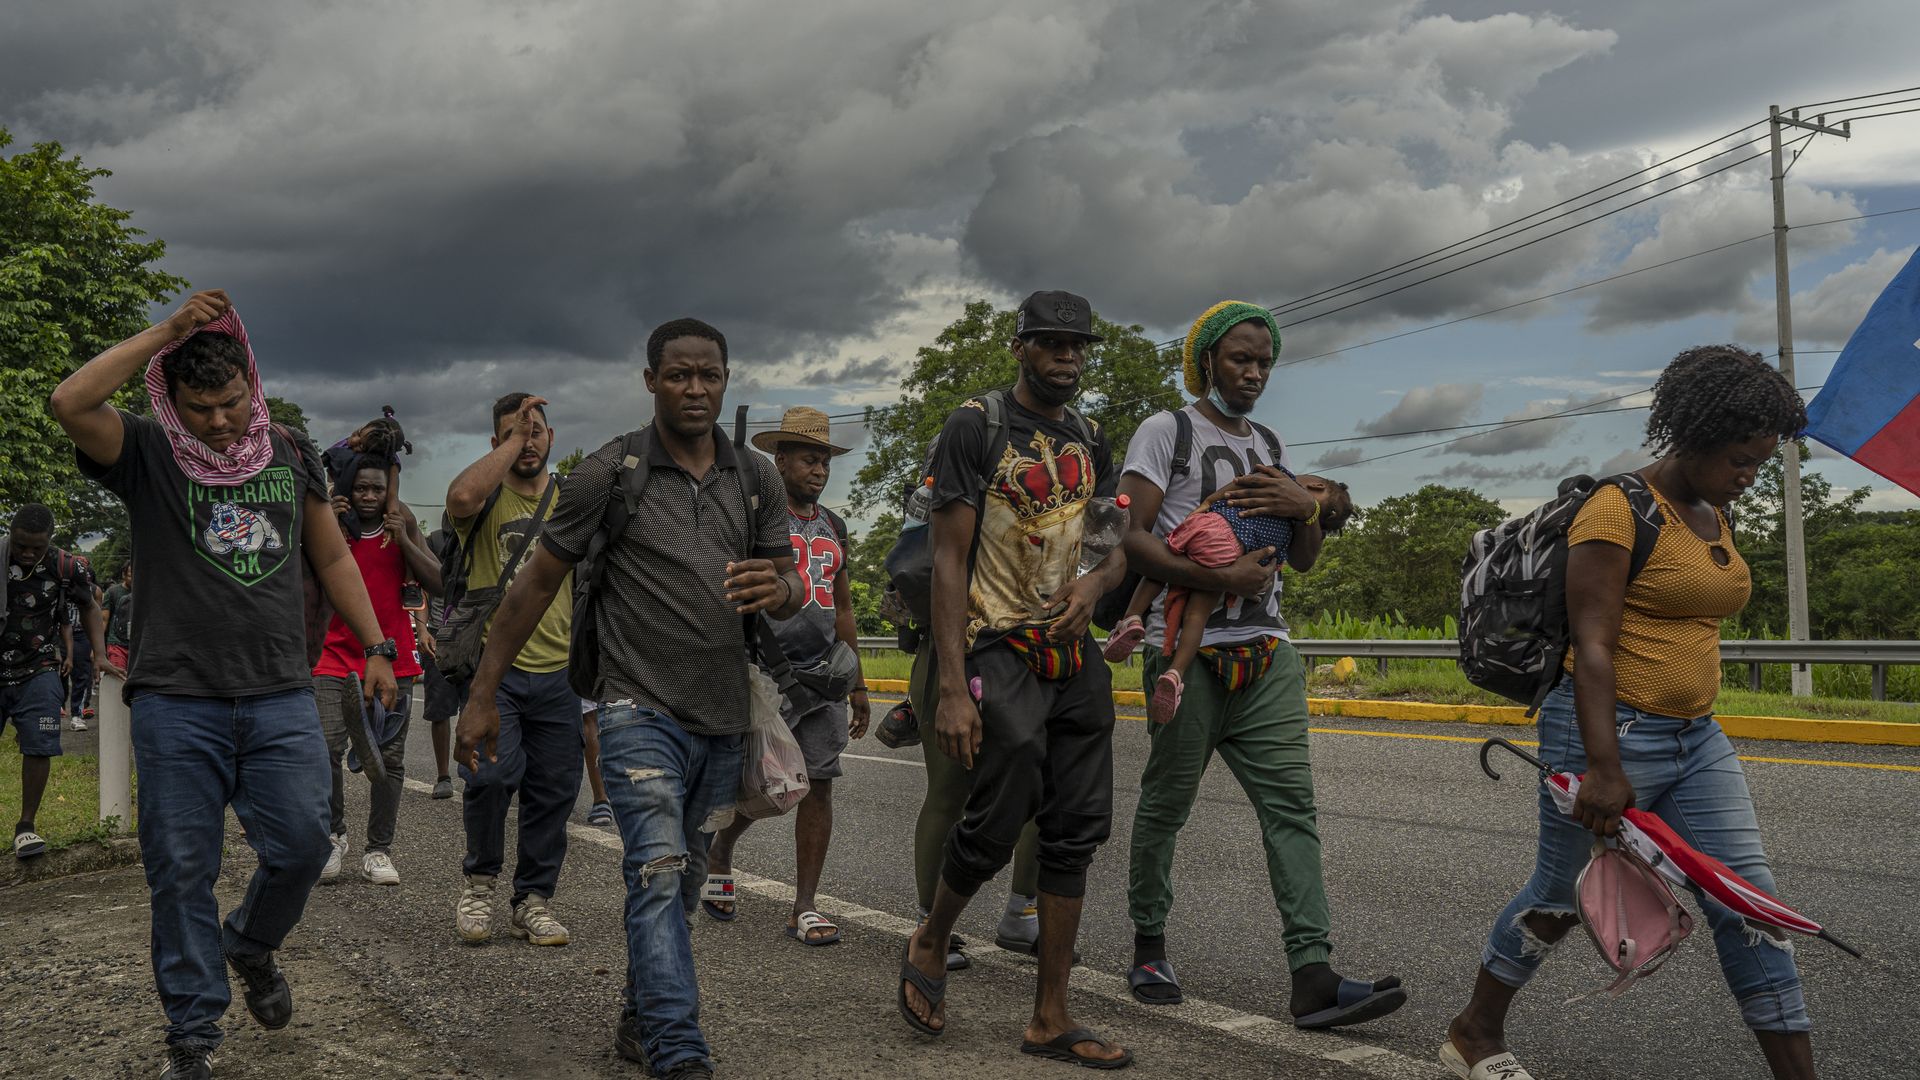 Haitian migrants walk along a highway in Tapachula, Chiapas state, Mexico, on Wednesday, Sept. 1, 2021